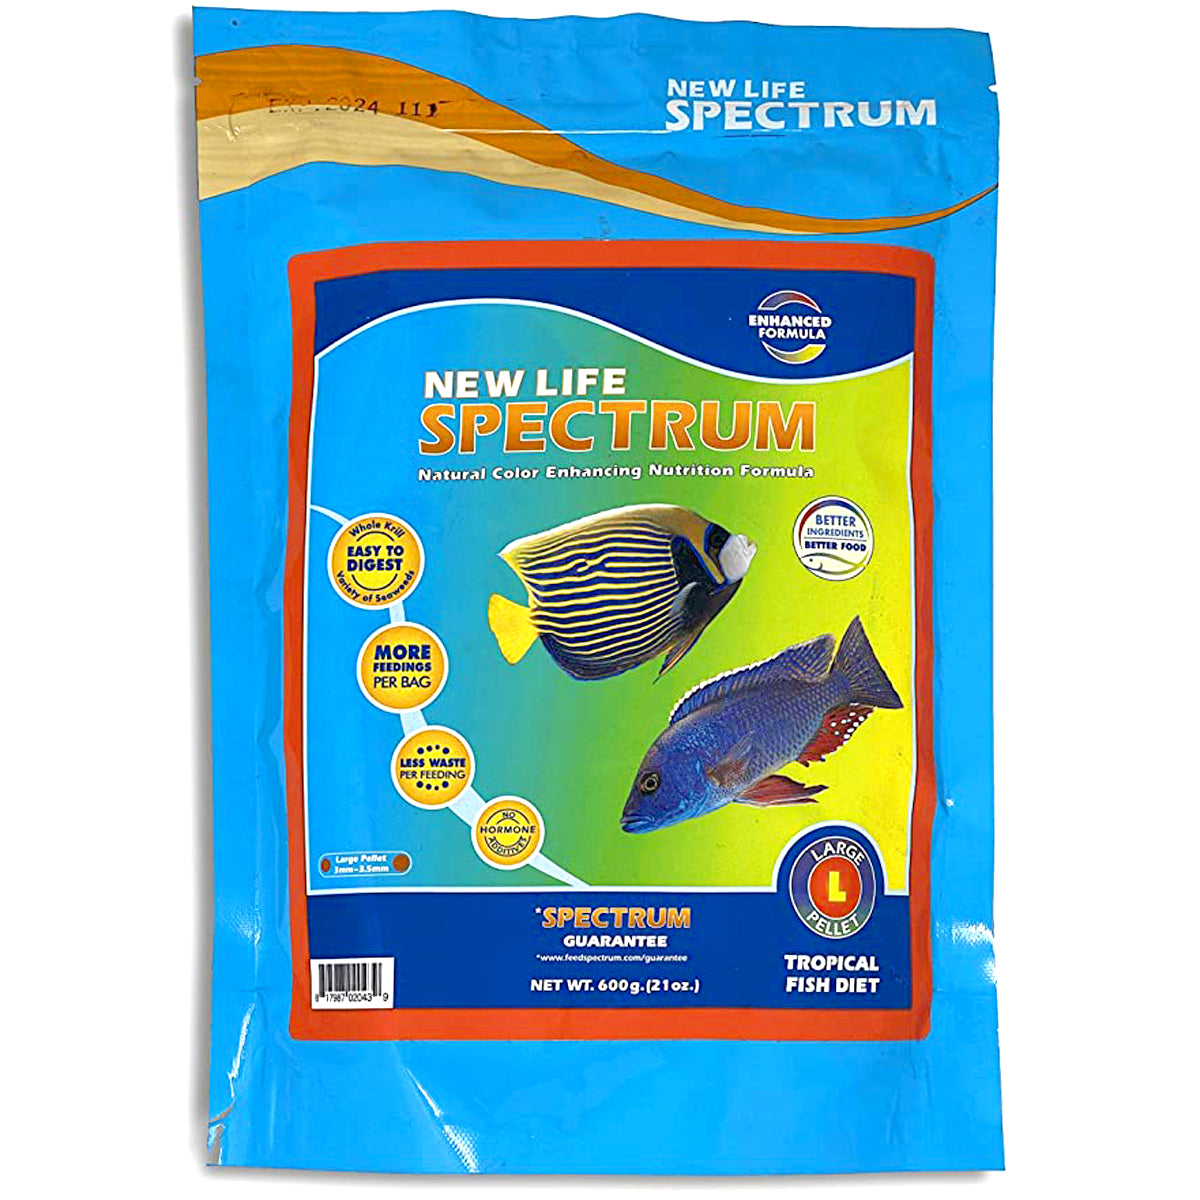 Treats, Feed freshwater fish, Freshwater products